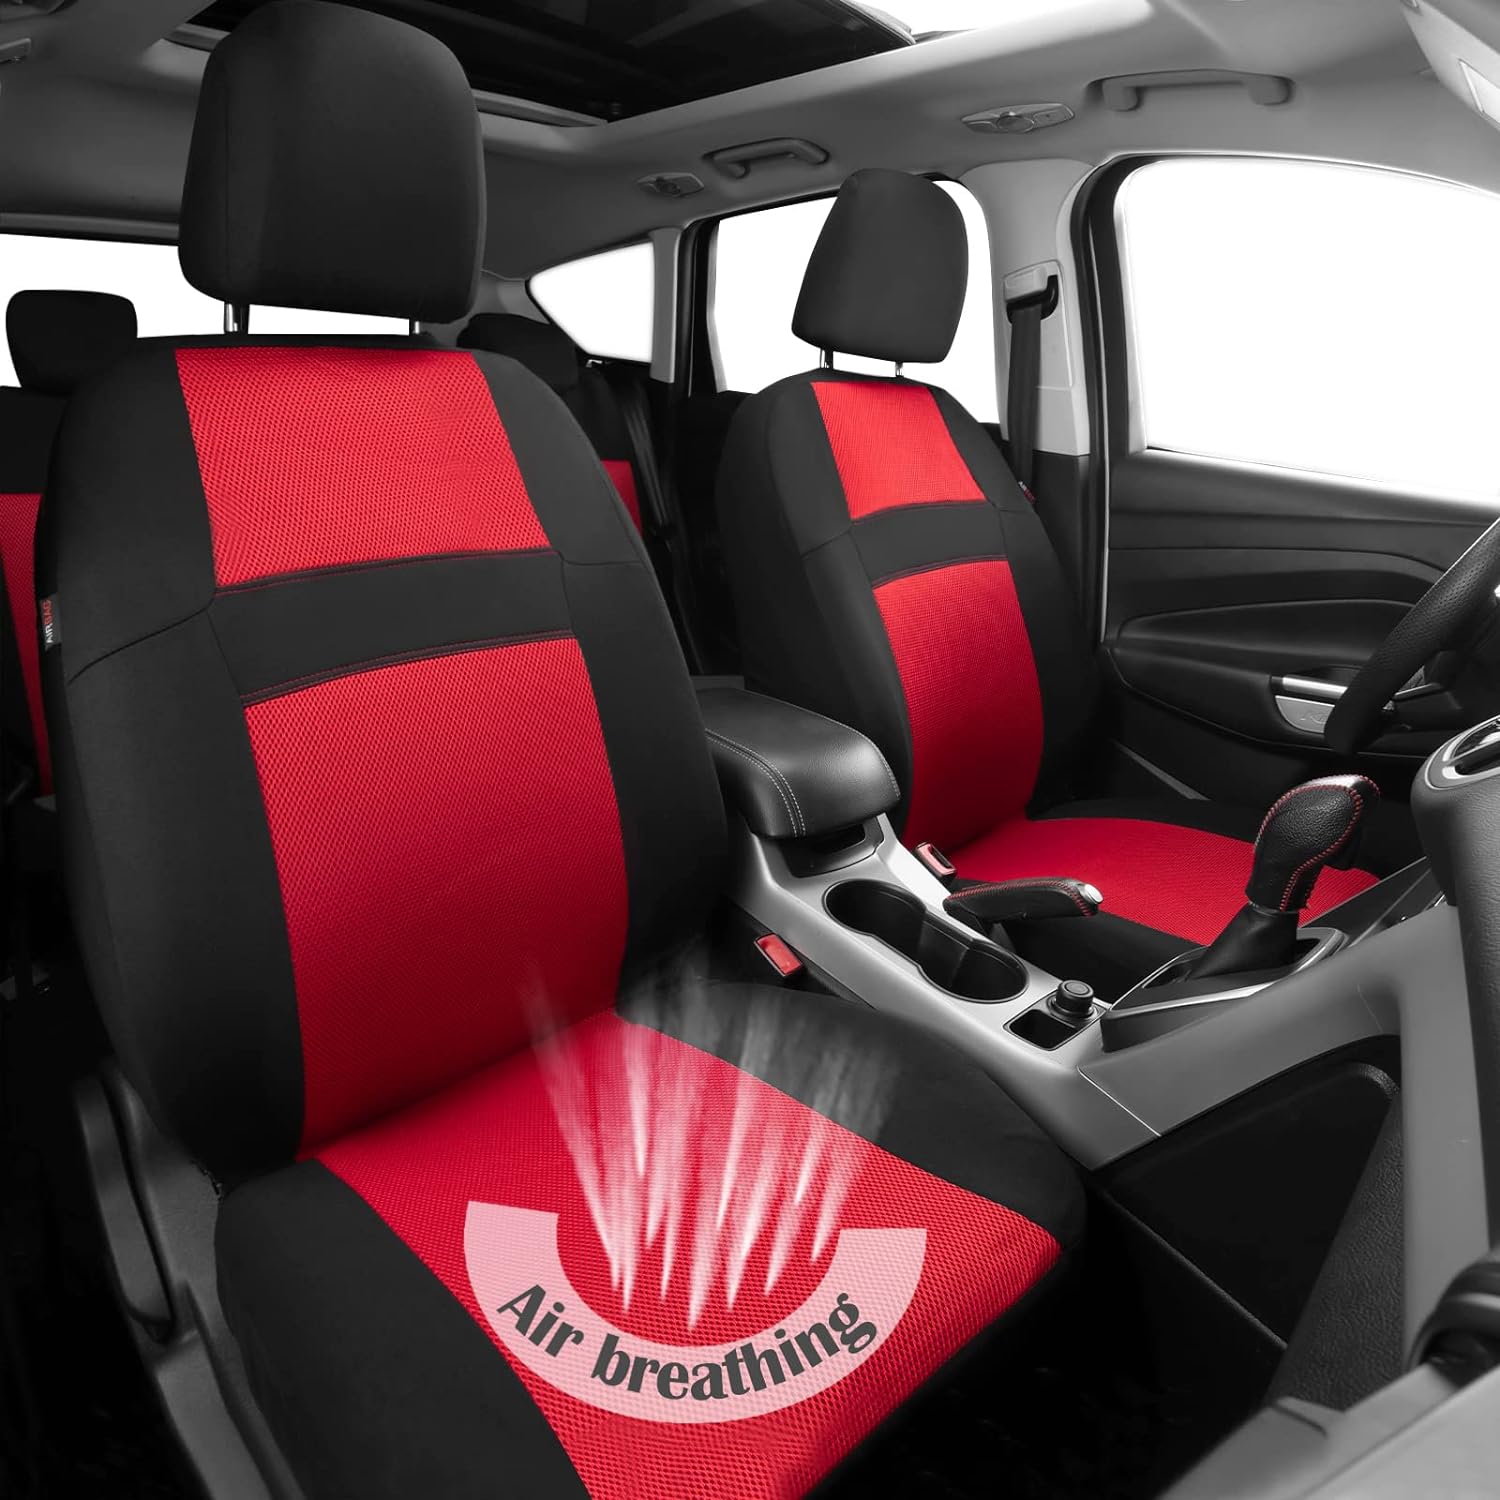 CAR PASS Universal Mesh Two Front Seat Covers & Car Floor mats,Steering Wheel Cover fits Most Cars, SUVs, Trucks, and Vans Airbag Compatible (Black and Red)